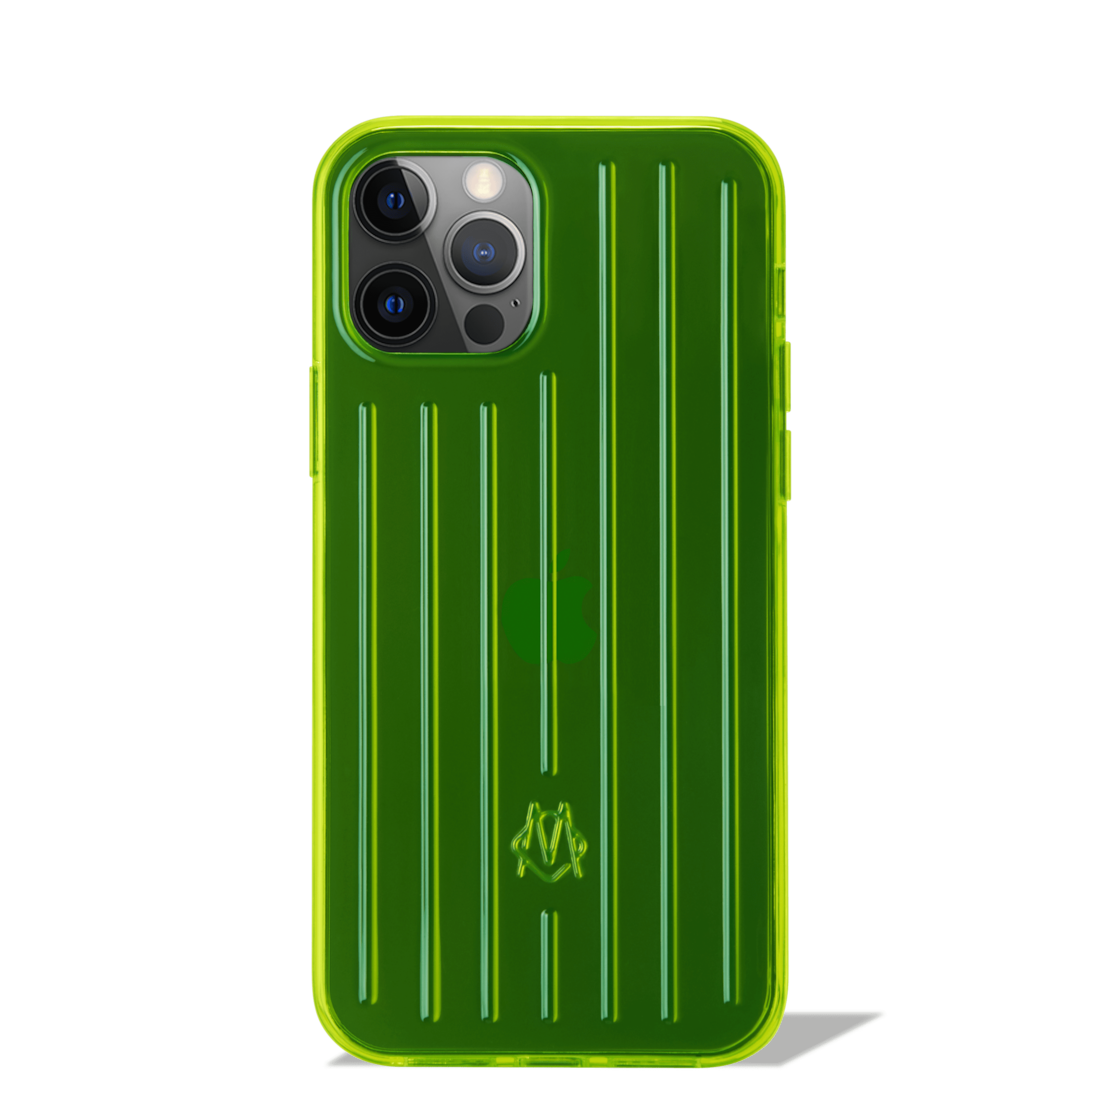 rimowa.com | Neon Lime Case for iPhone 12 & 12 Pro